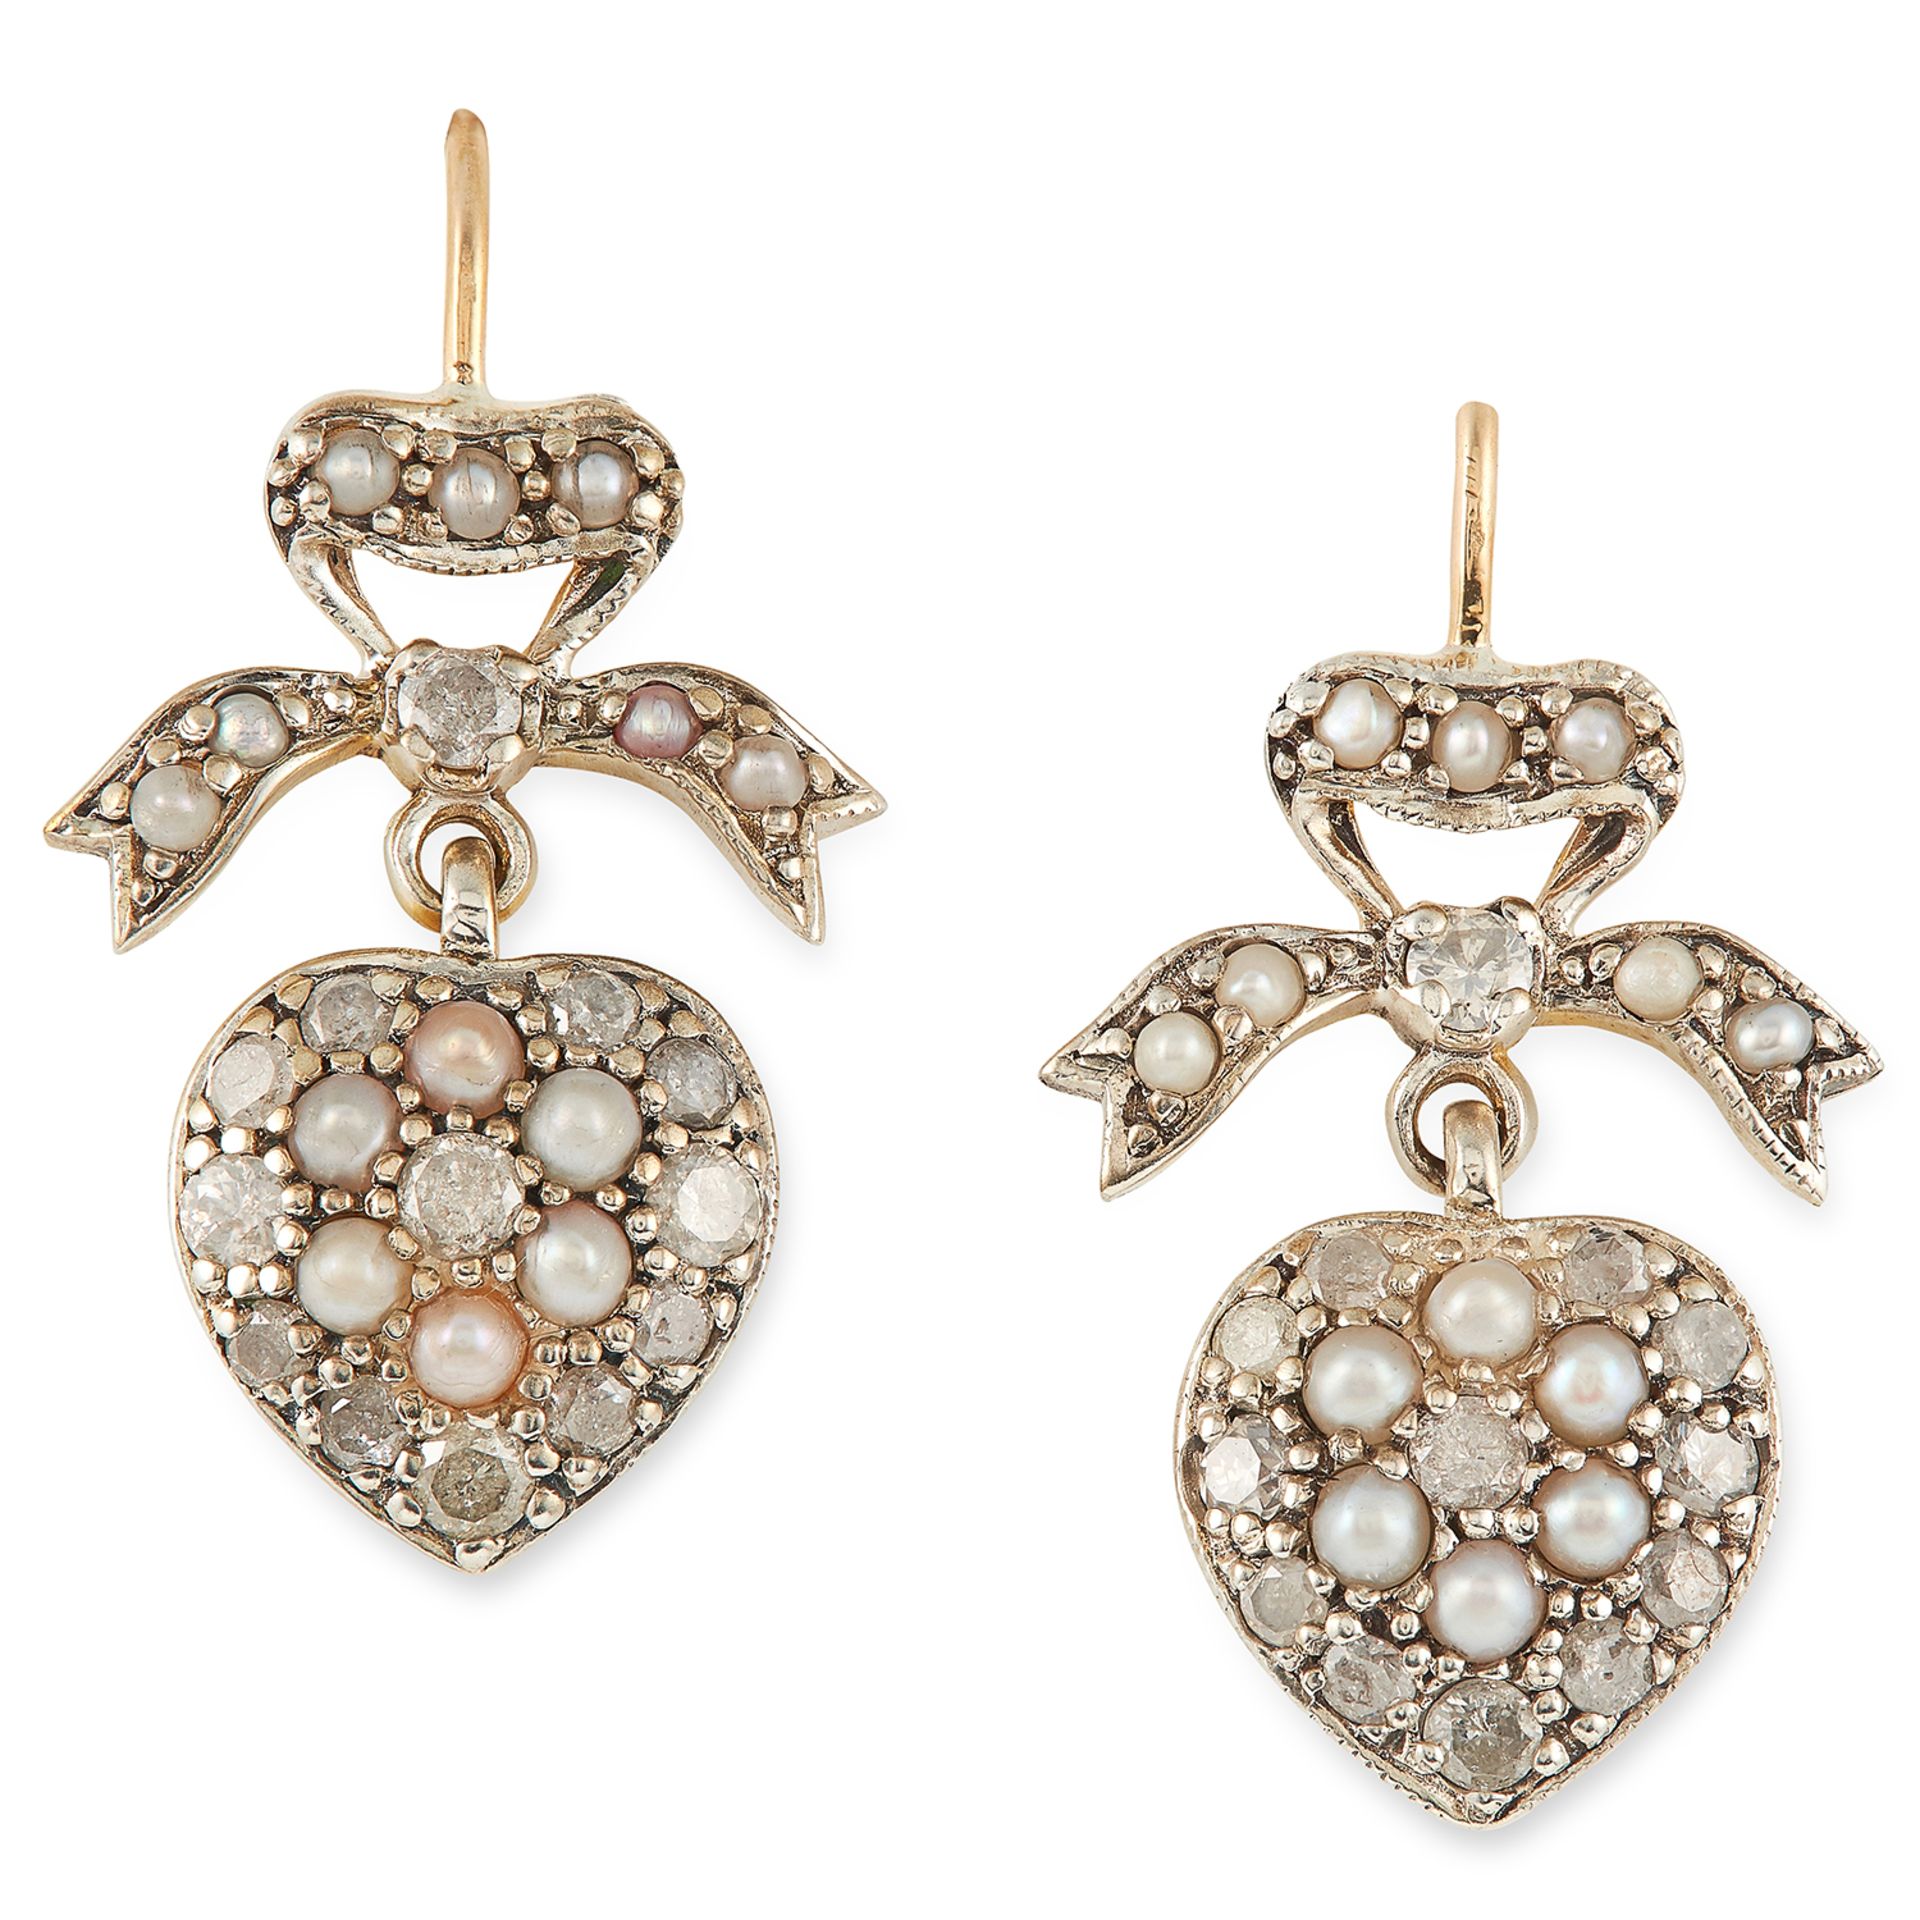 DIAMOND AND PEARL SWEETHEART EARRINGS in ribbon and heart motif set with round cut diamonds and